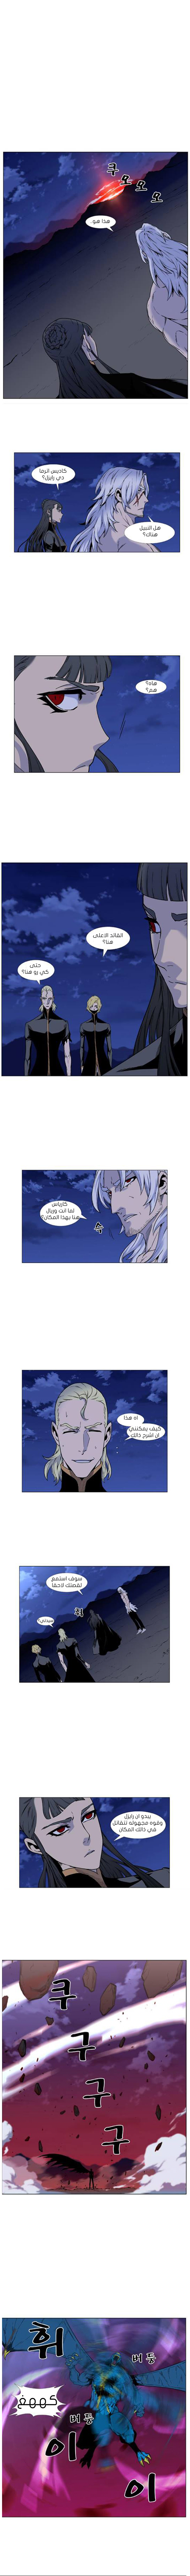 Noblesse: Chapter 449 - Page 1